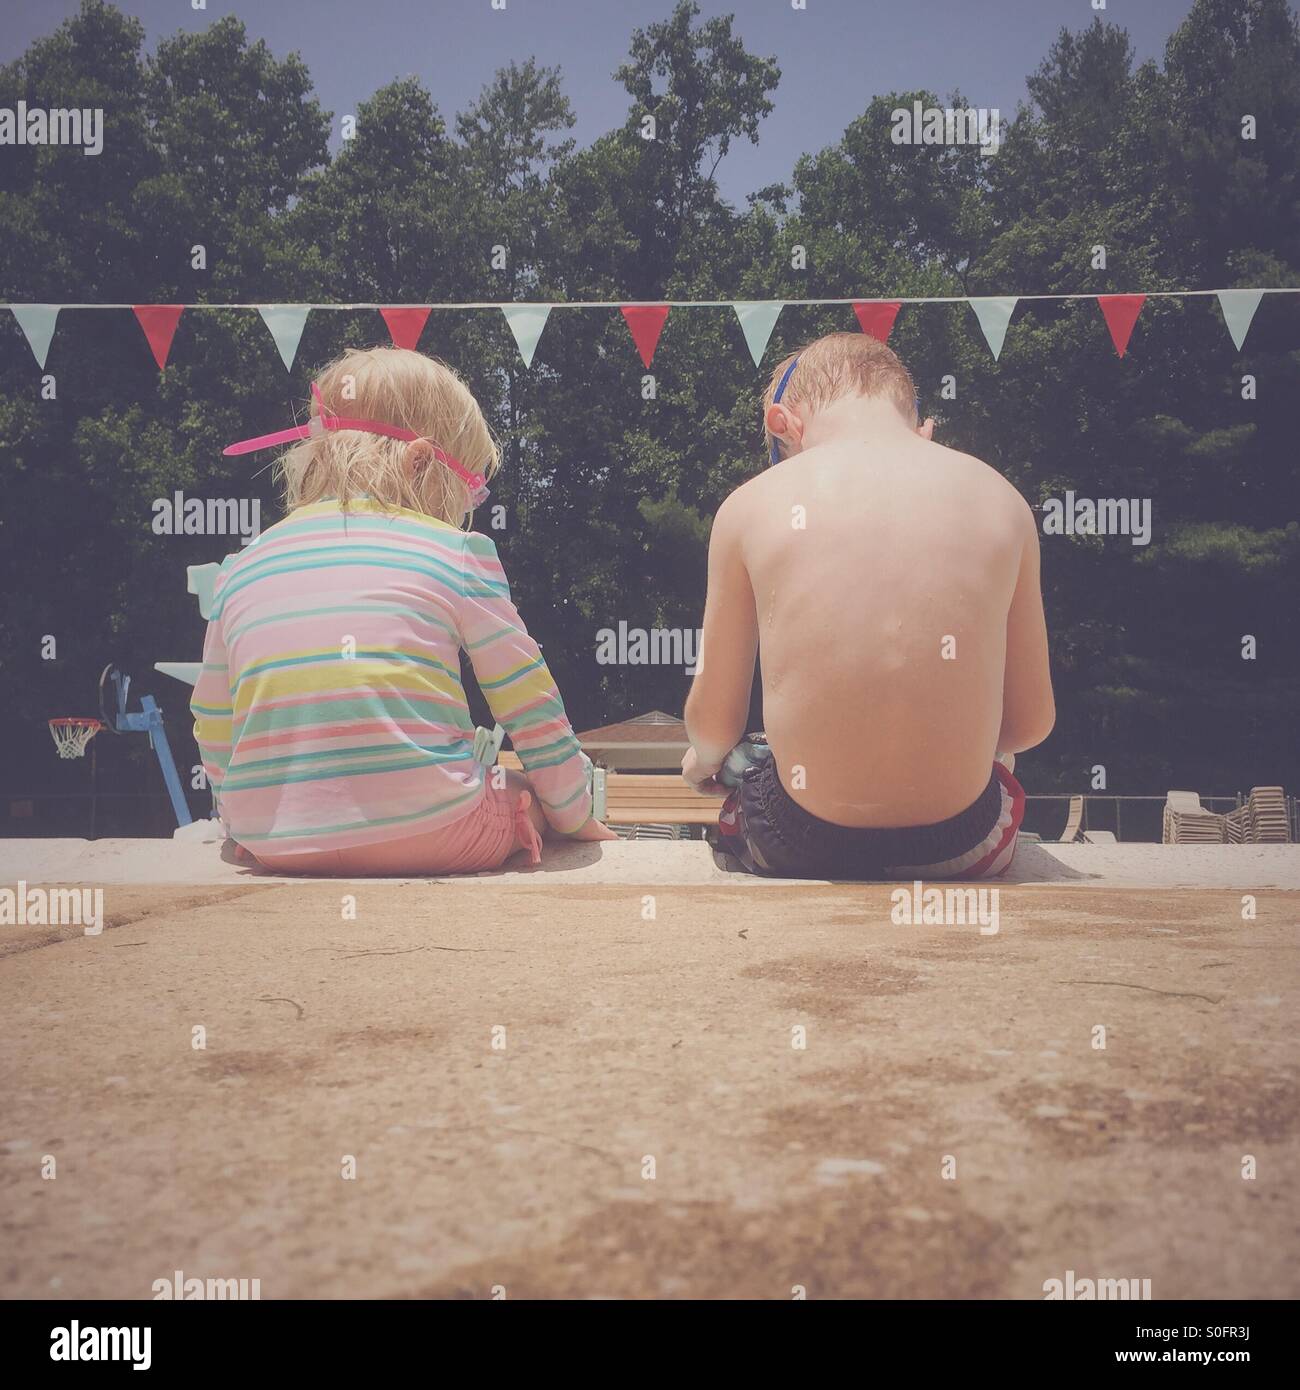 Two young children sitting next to each other on the side of a swimming pool. Stock Photo